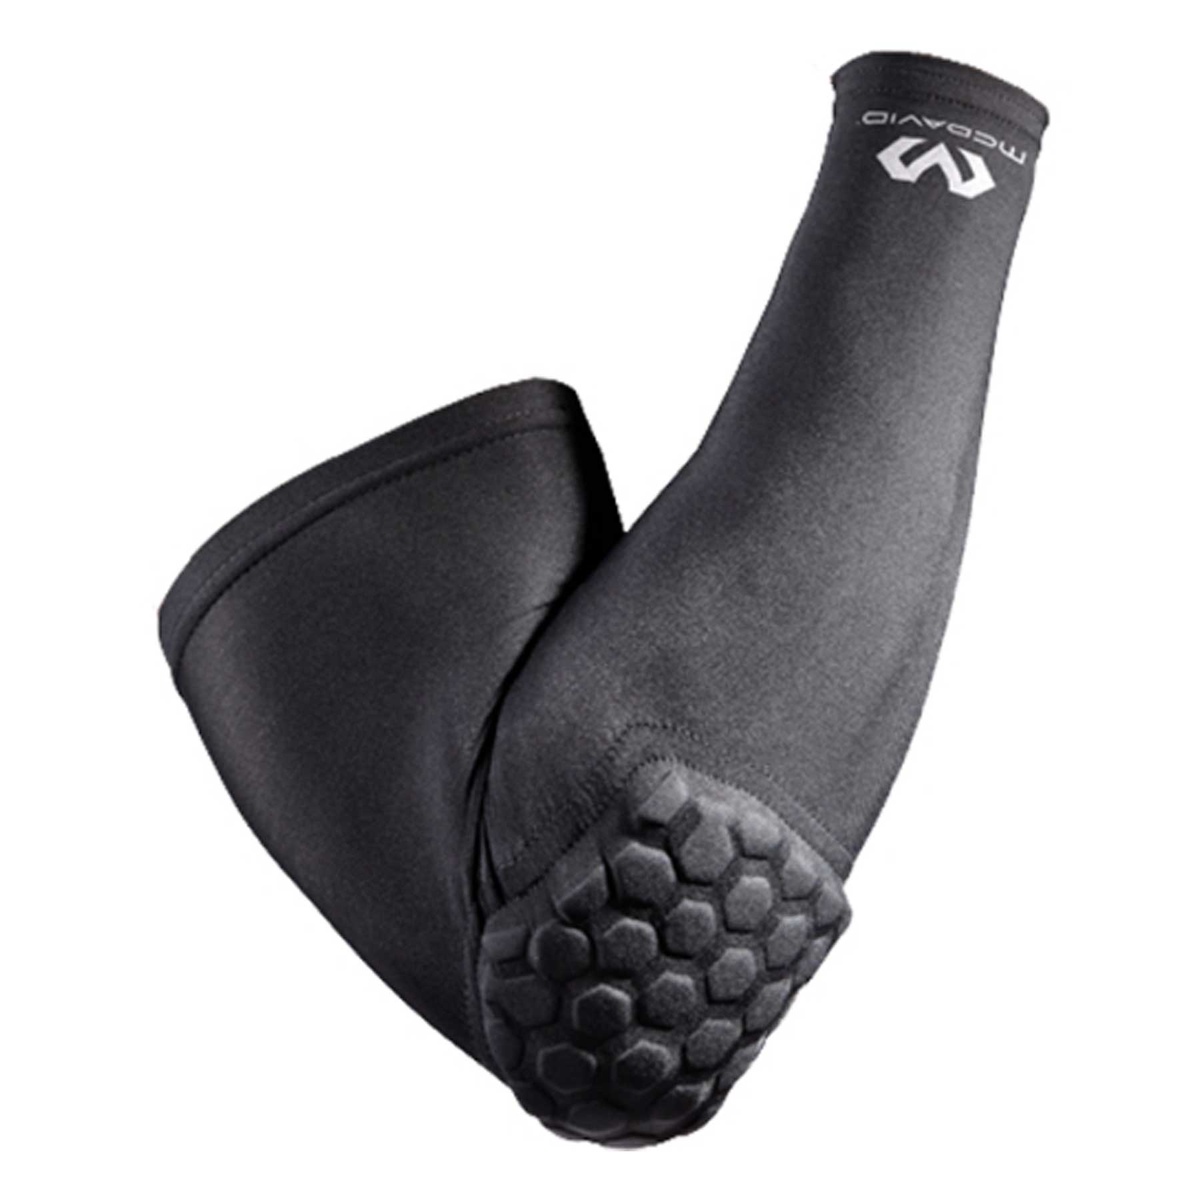 Manicotto Compression hex shooter arm sleeve